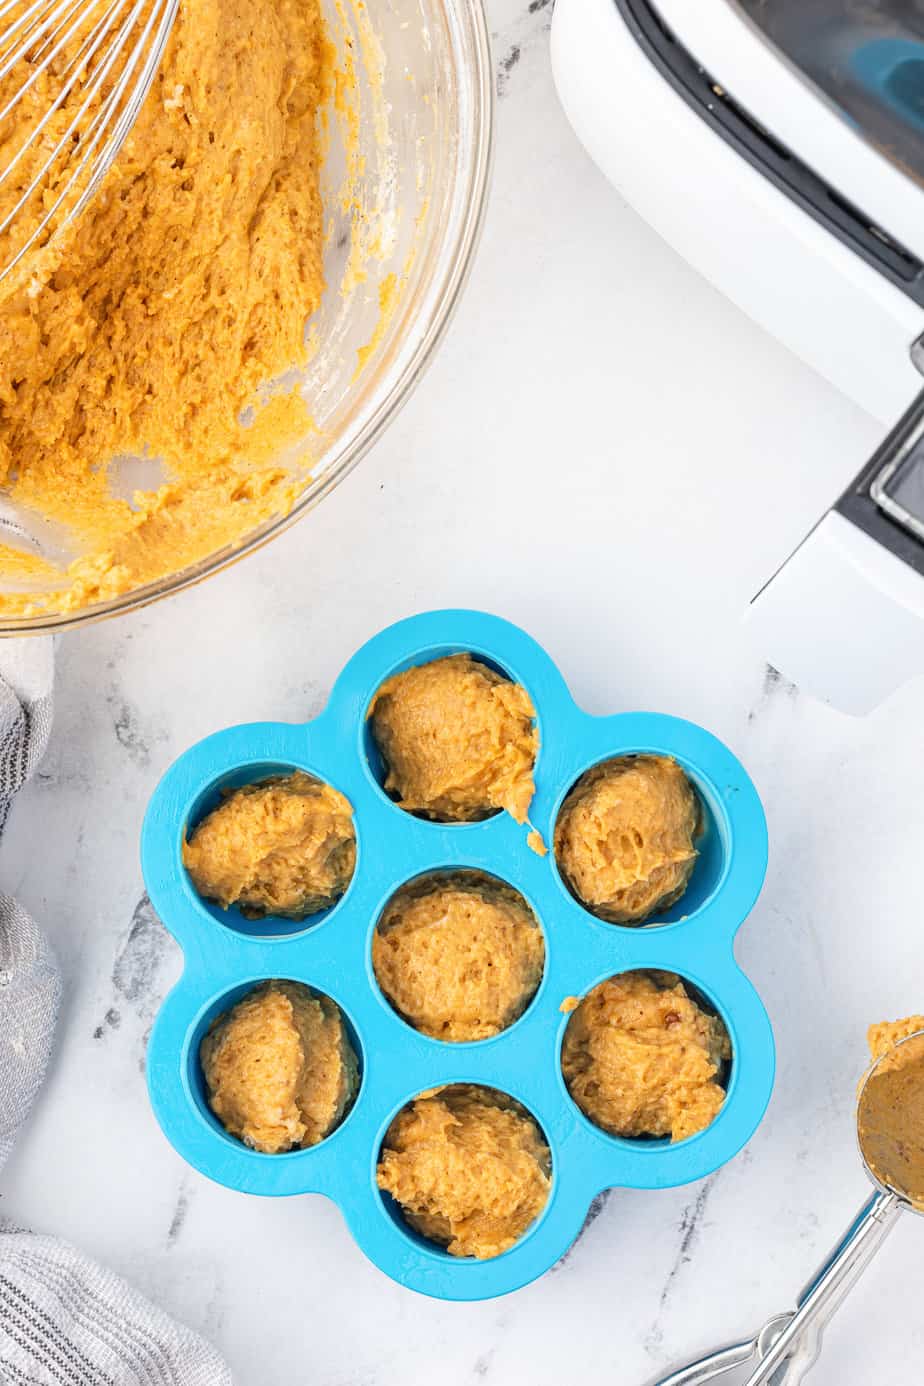 Pumpkin donut hole bites in a silicone mini muffin pan from overhead on a counter with a bowl full of more batter and an air fryer nearby.